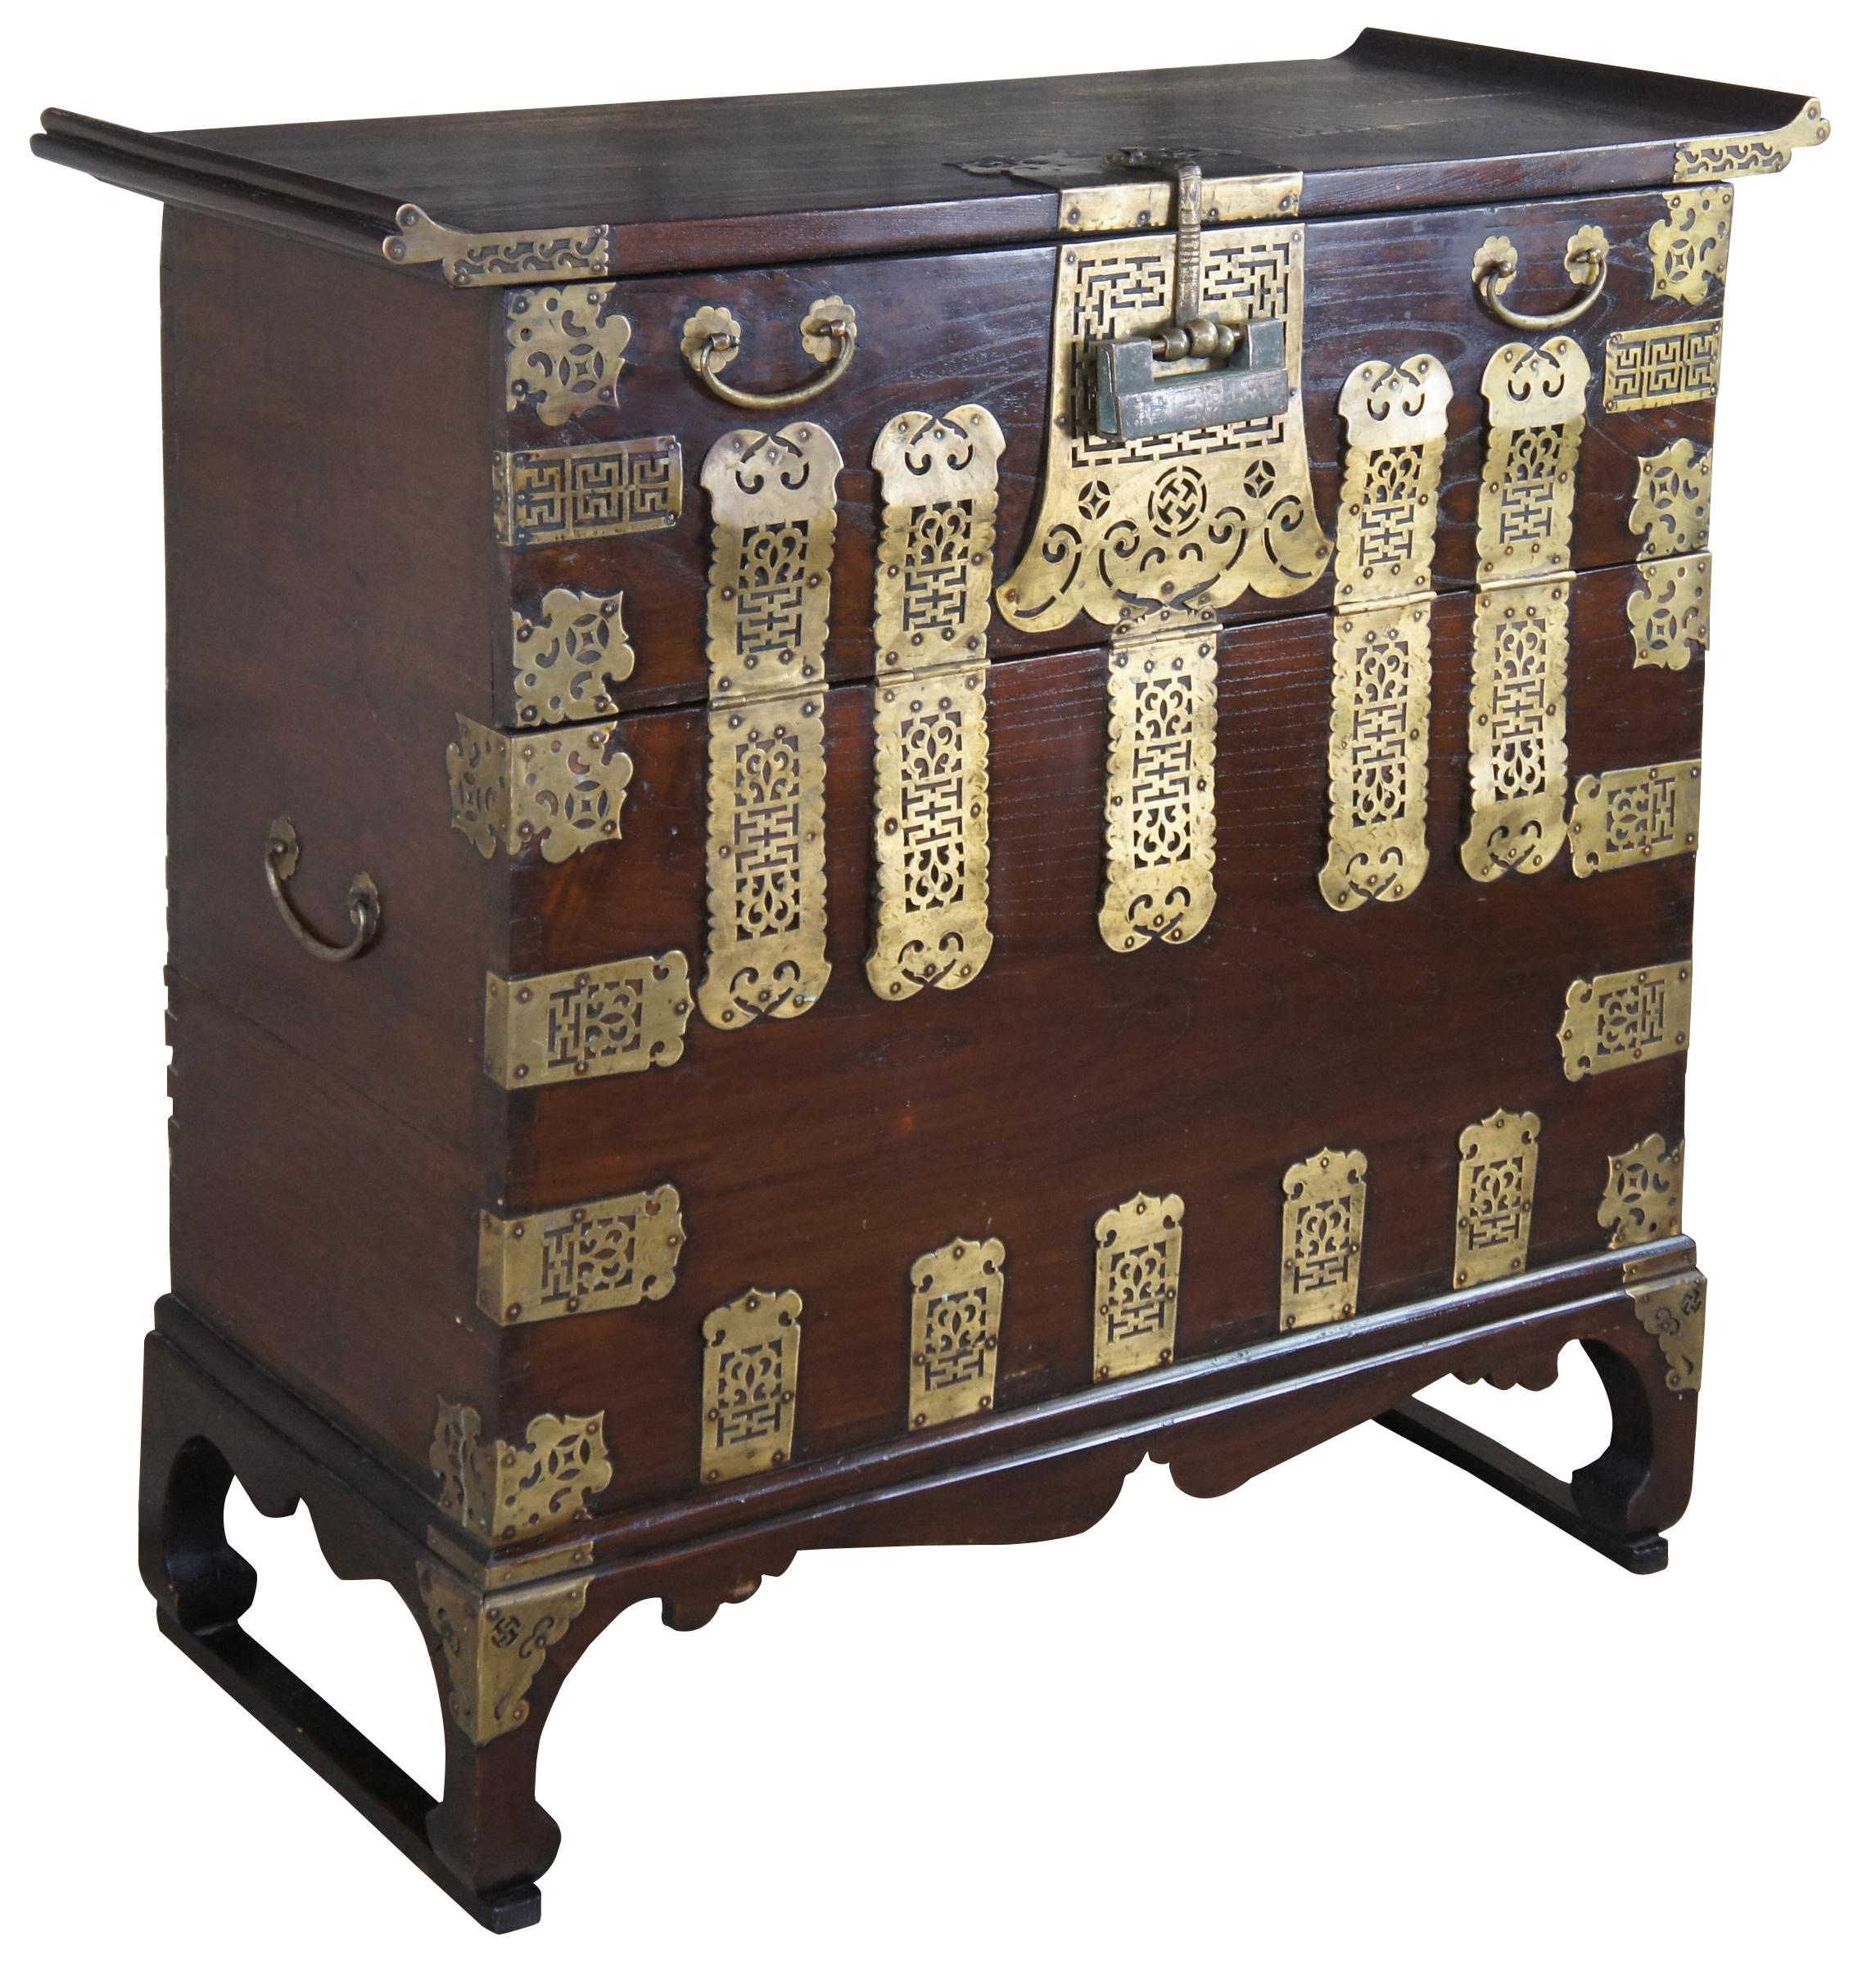 Antique Korean Bandaji chest or trunk featuring Zelkova elm frame with brass accents. The Korean name bandaji (literally meaning 